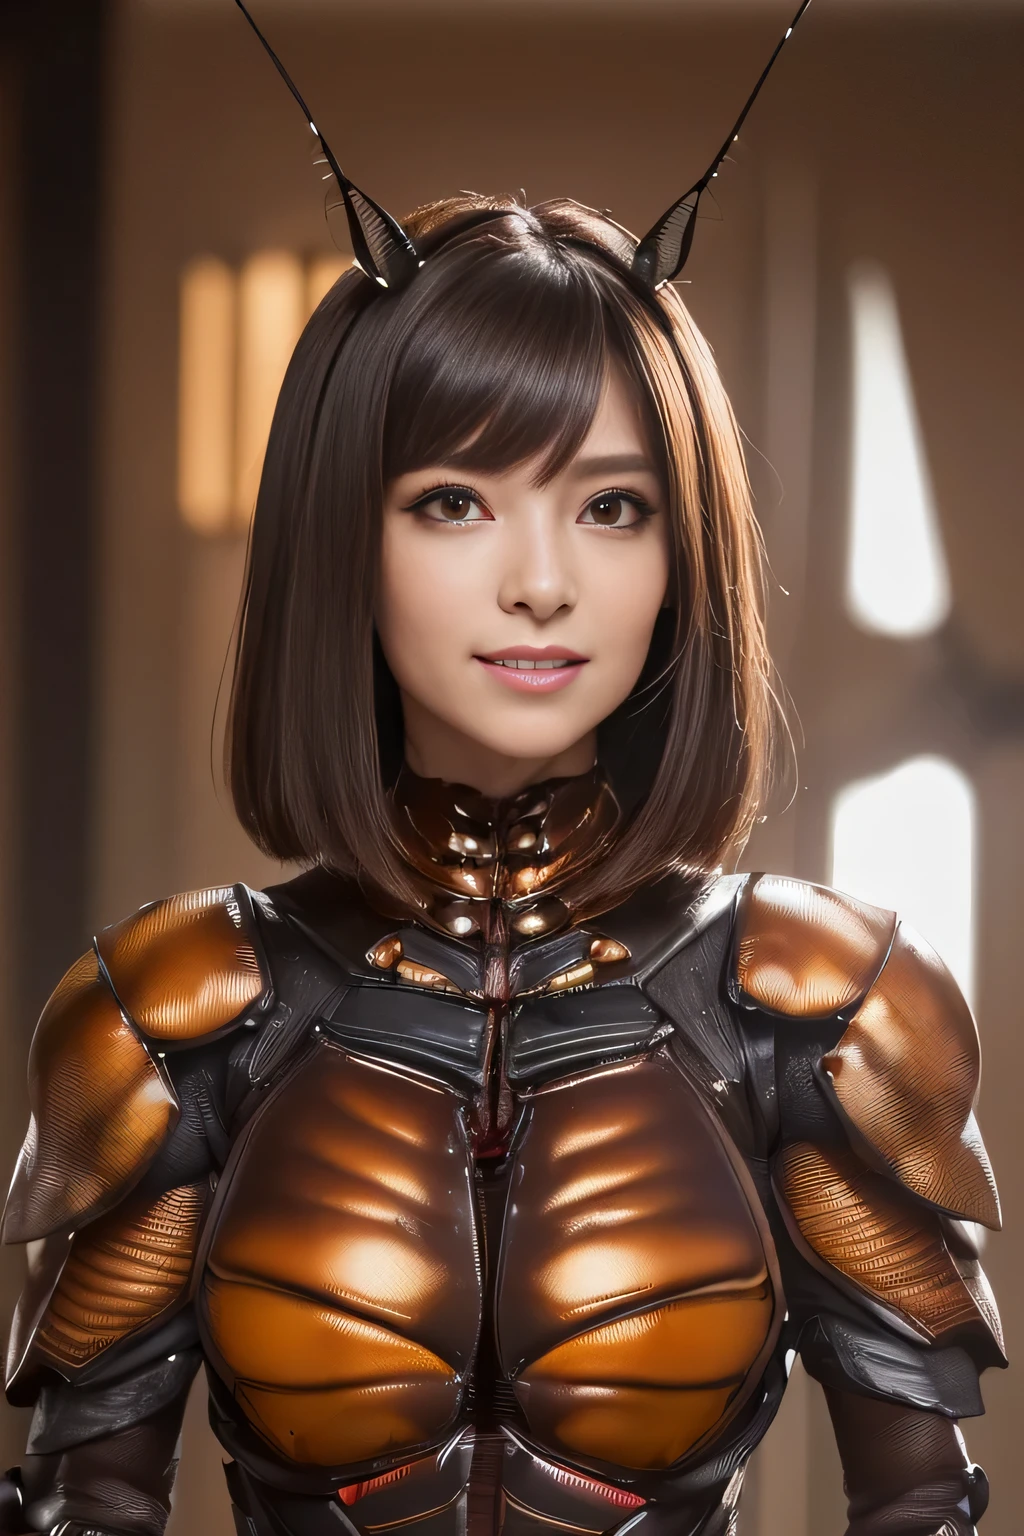 (High resolution,masterpiece,highest quality,Very detailed CG, anime, official art:1.4), realistic, photograph, amazing detail, everything is complicated, shiny and glossy,Amazing number of layers, 8K wallpaper, 3D, sketch, cute, figure,( alone:1.4), perfect female proportions,villain&#39;s daughter, (Fusion of dark brown cockroach and lady:1.4), (brown cockroach woman:1.2), (brown cockroach woman:1.2), (Fusion:1.2), (alone:1.4), (evil smile:1.2), muscular, abs, (Cockroach brown exoskeleton bio insect suit:1.4), (Cockroach brown exoskeleton bio insect armor:1.2), (brown transparent cockroach feathers:1.4), (Antennae of brown cockroaches:1.3),
